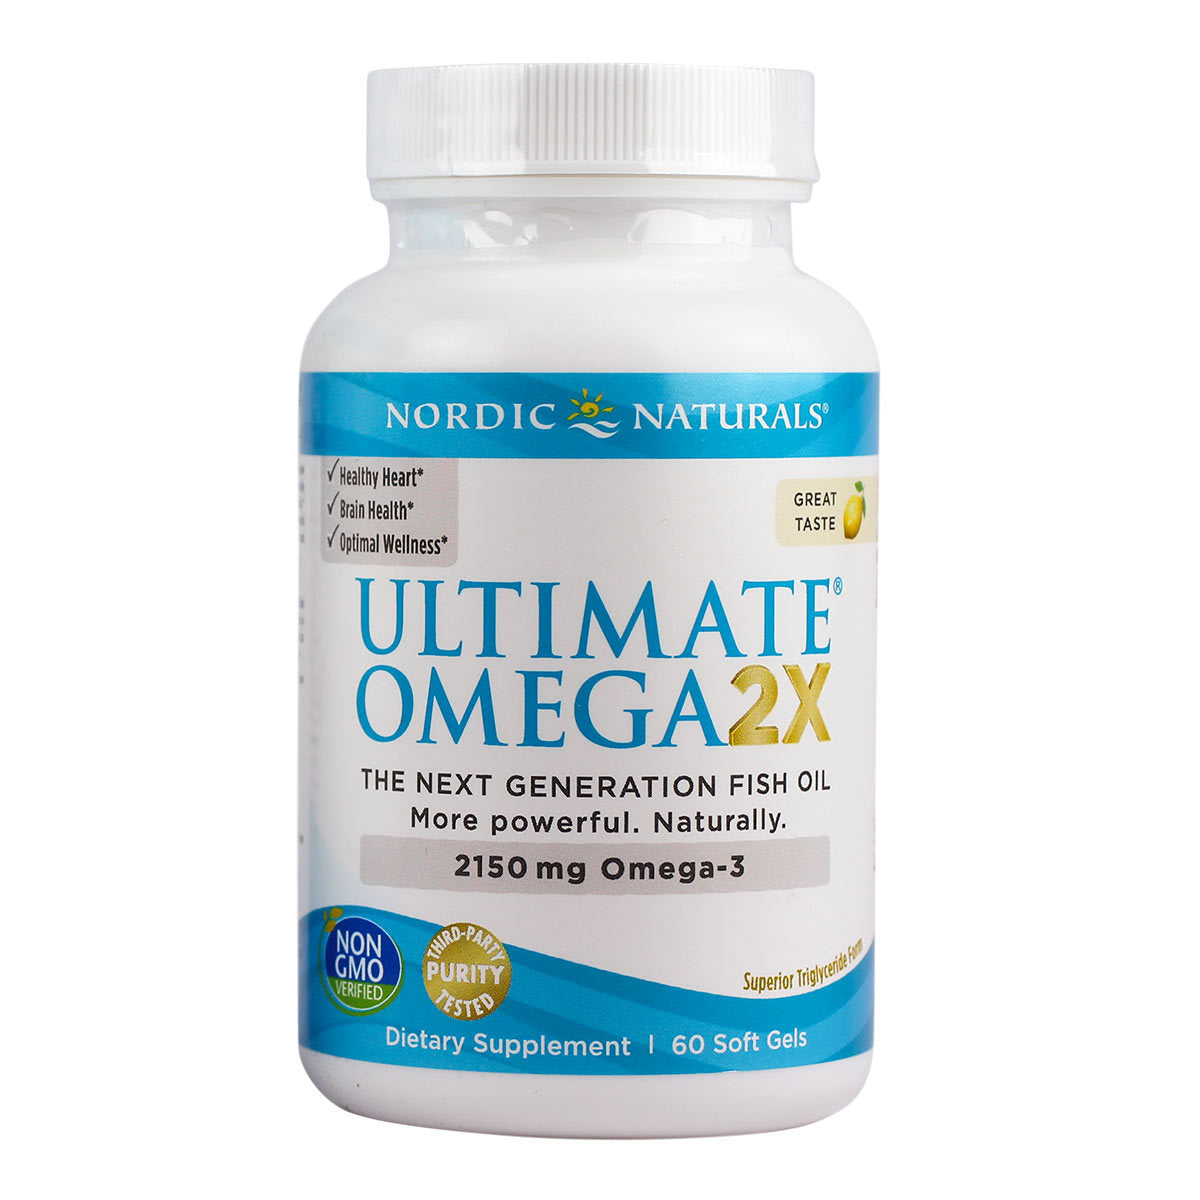 Primary image of Ultimate Omega 2X Soft Gels